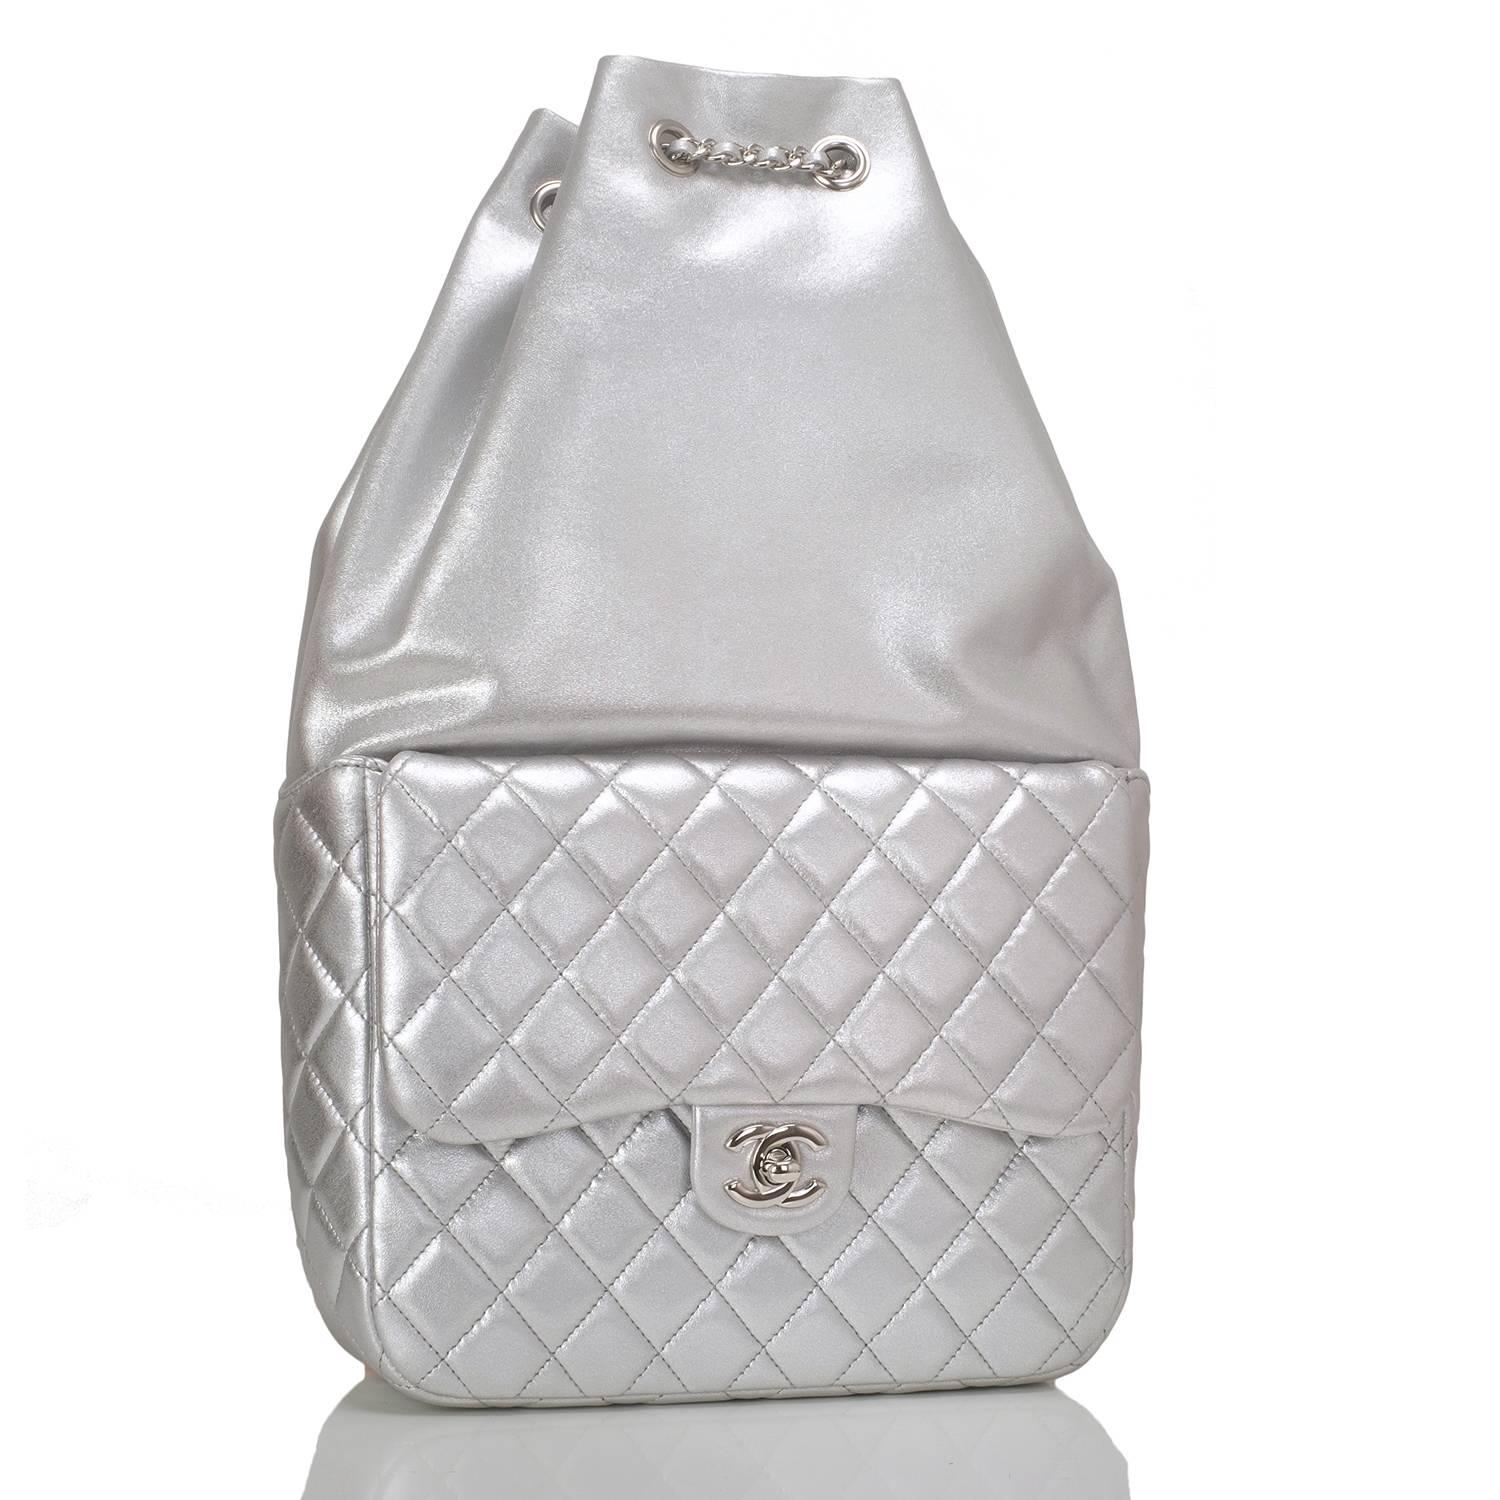 Chanel backpack of silver metallic lambskin leather with silver tone tone hardware.

This backpack has a front quilted leather flap pocket with a signature CC turnlock closure, a top cinch closure, and interwoven silver tone chain link with dark